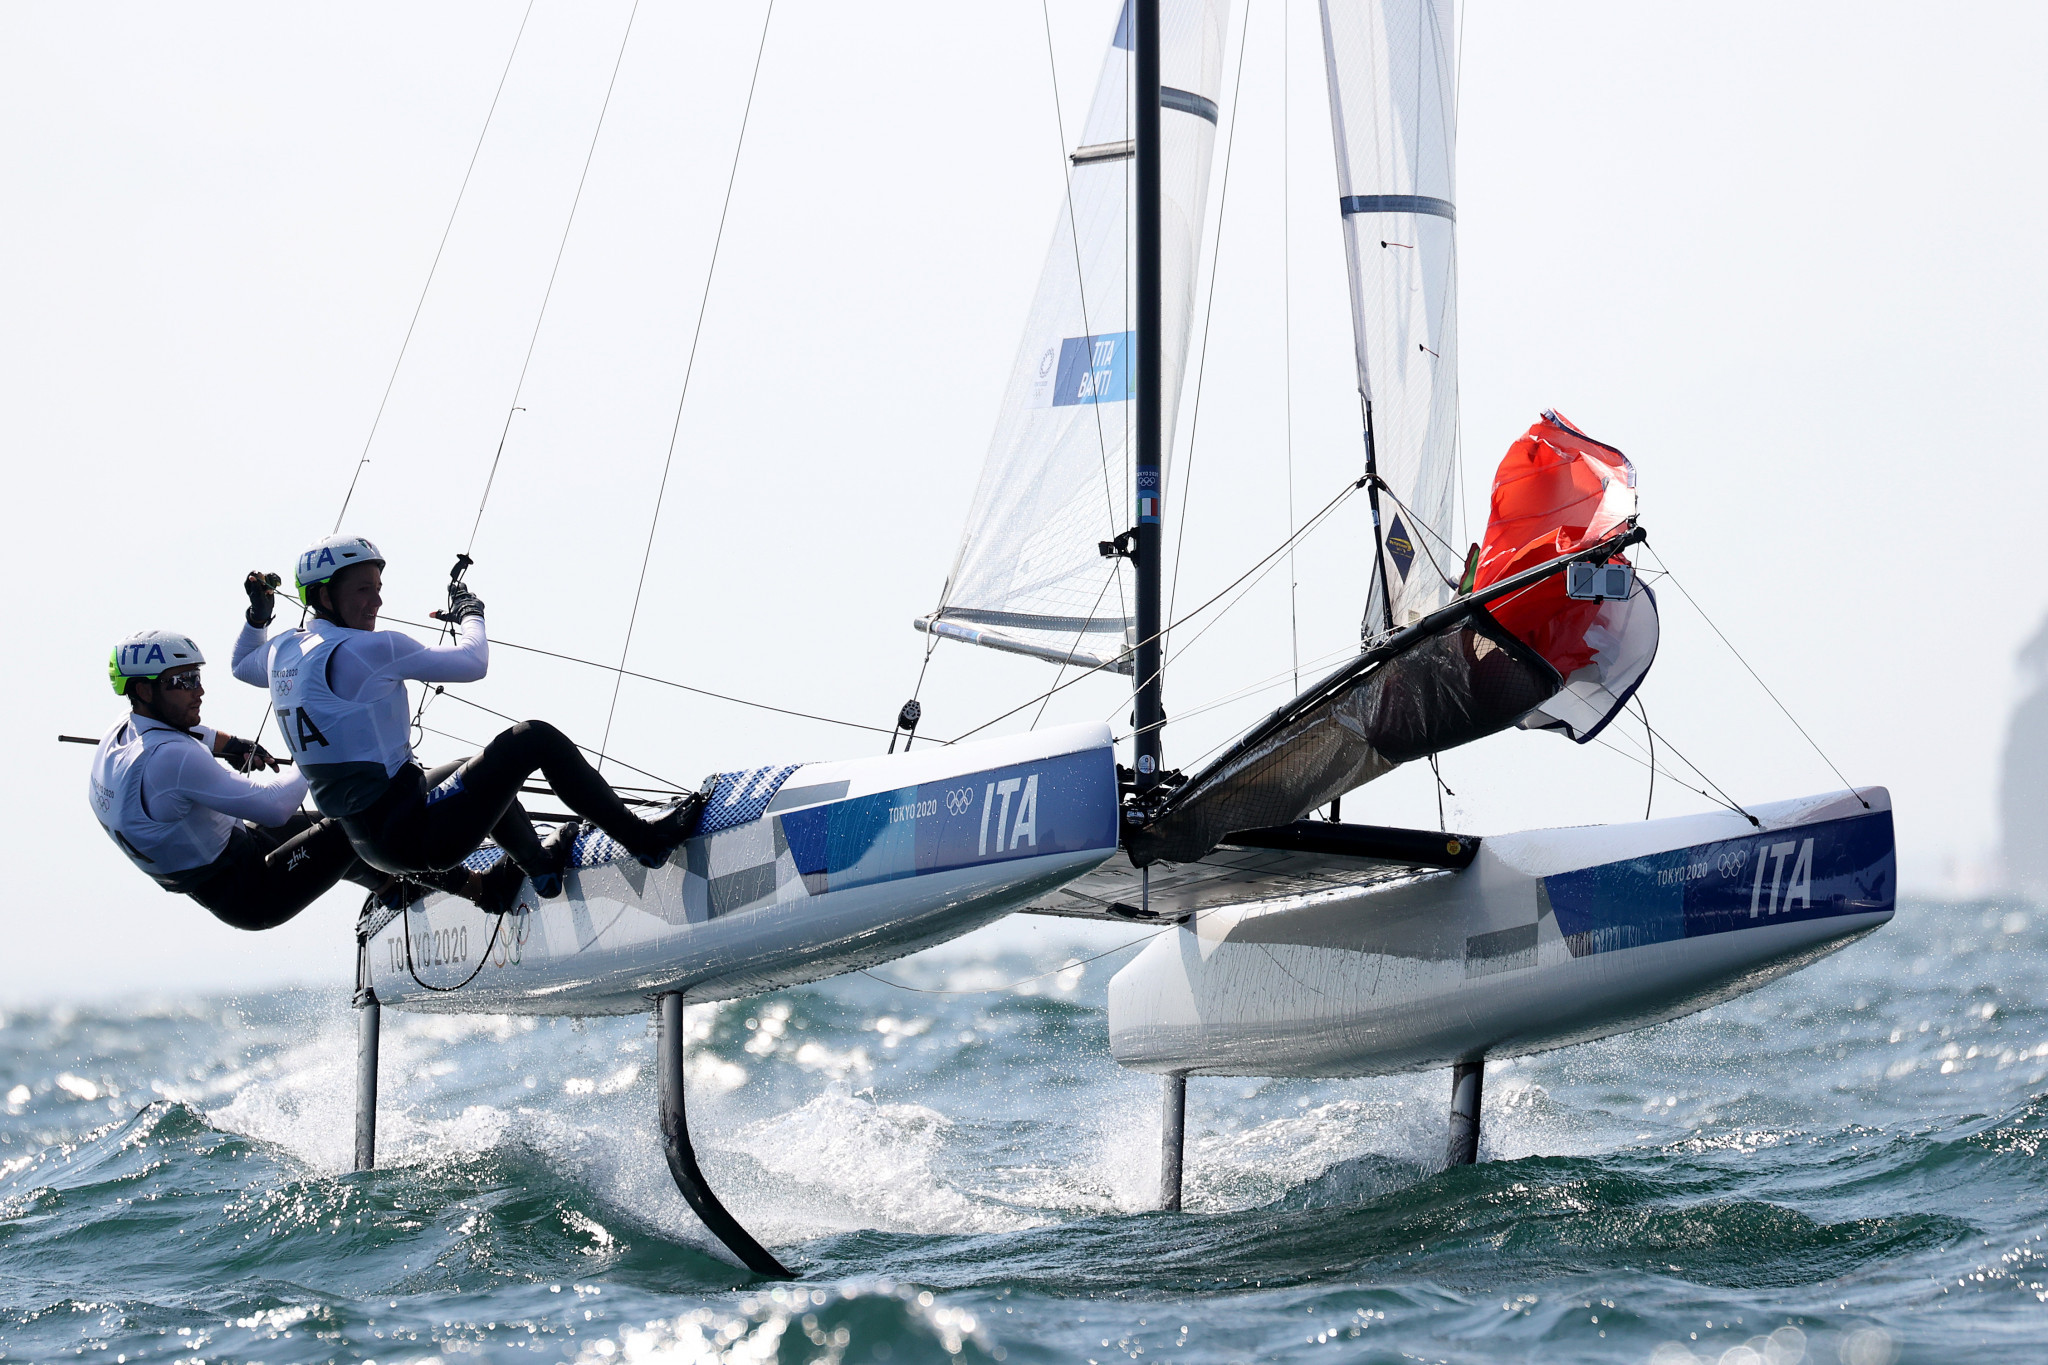 Ruggero Tita and Caterina Banti of Italy have continued to register wins in the Nacra17 event ©Getty Images